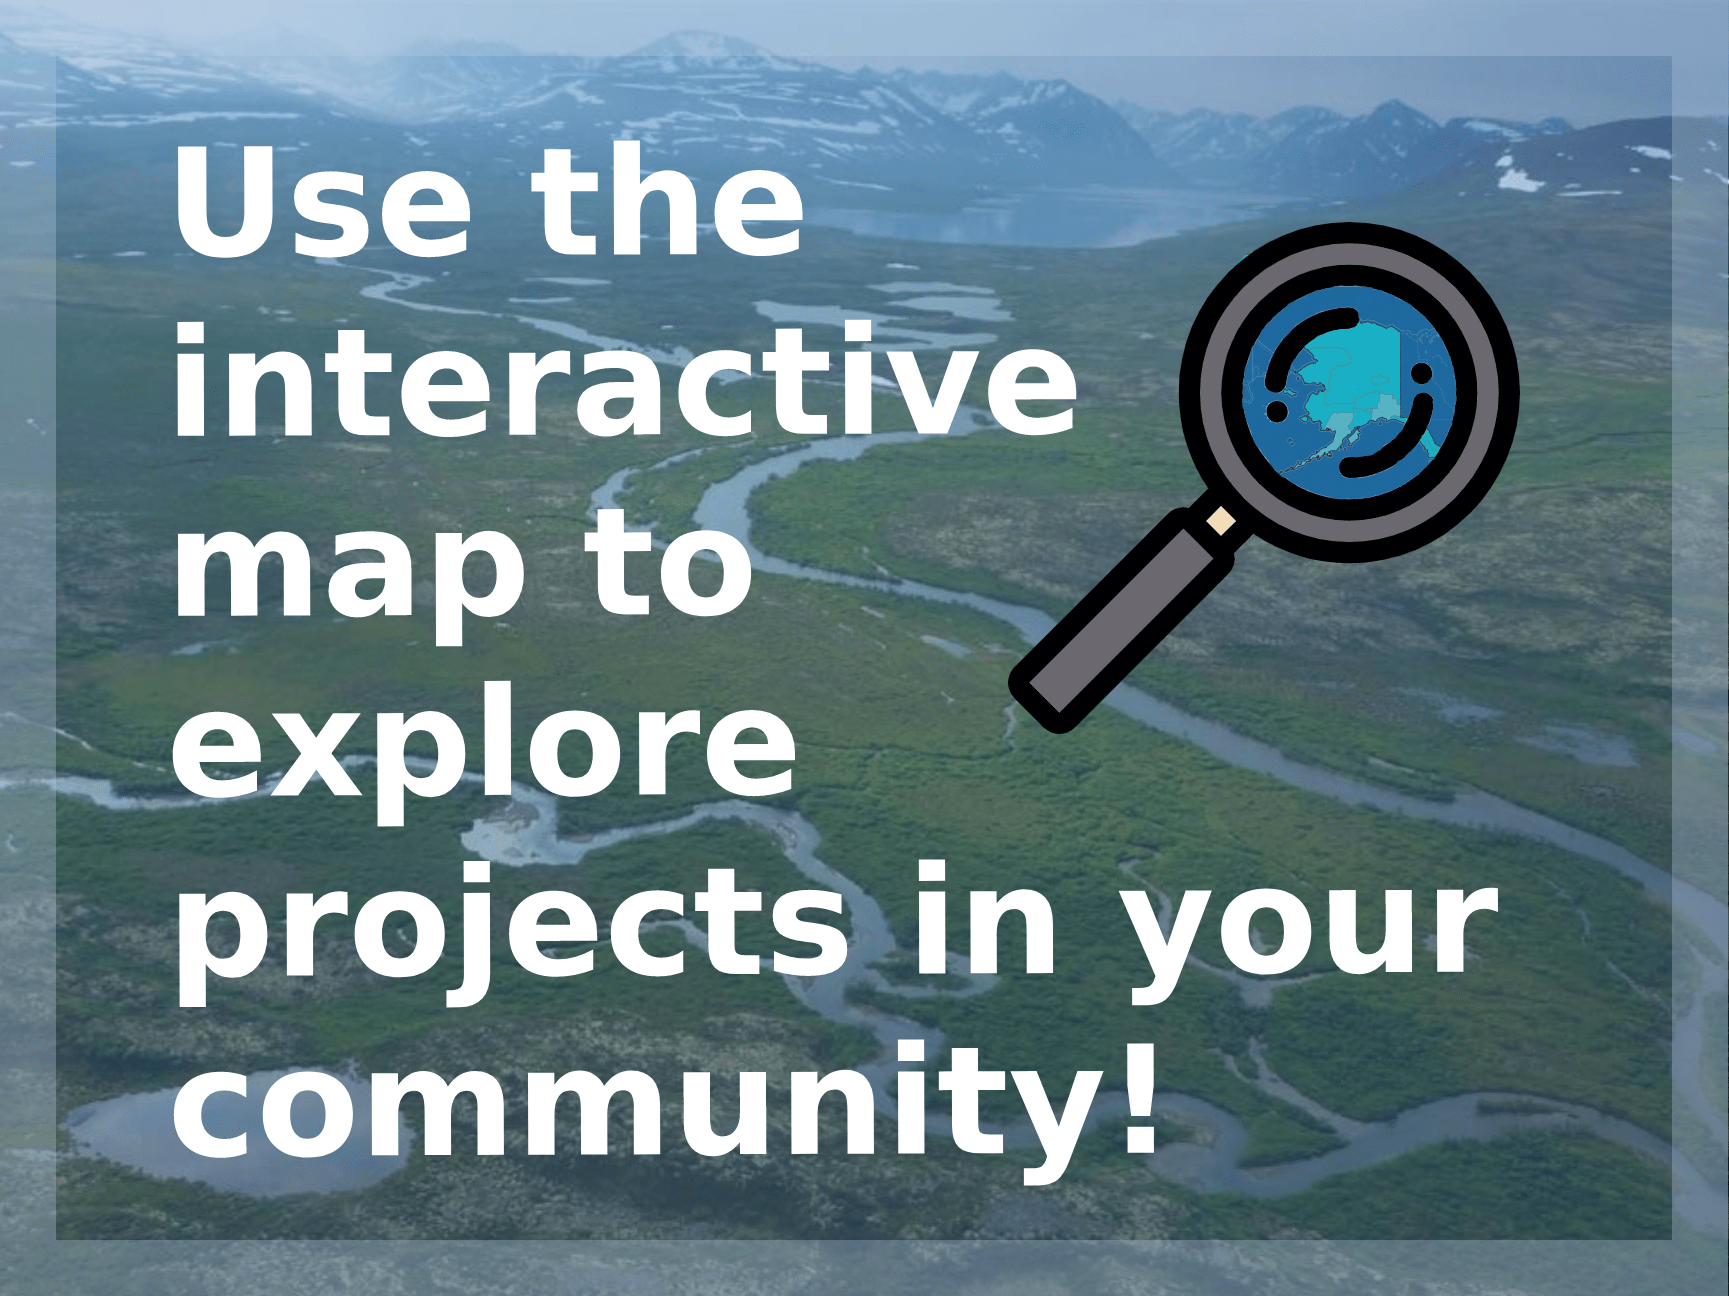 Use the interactive map to explore projects in your community.